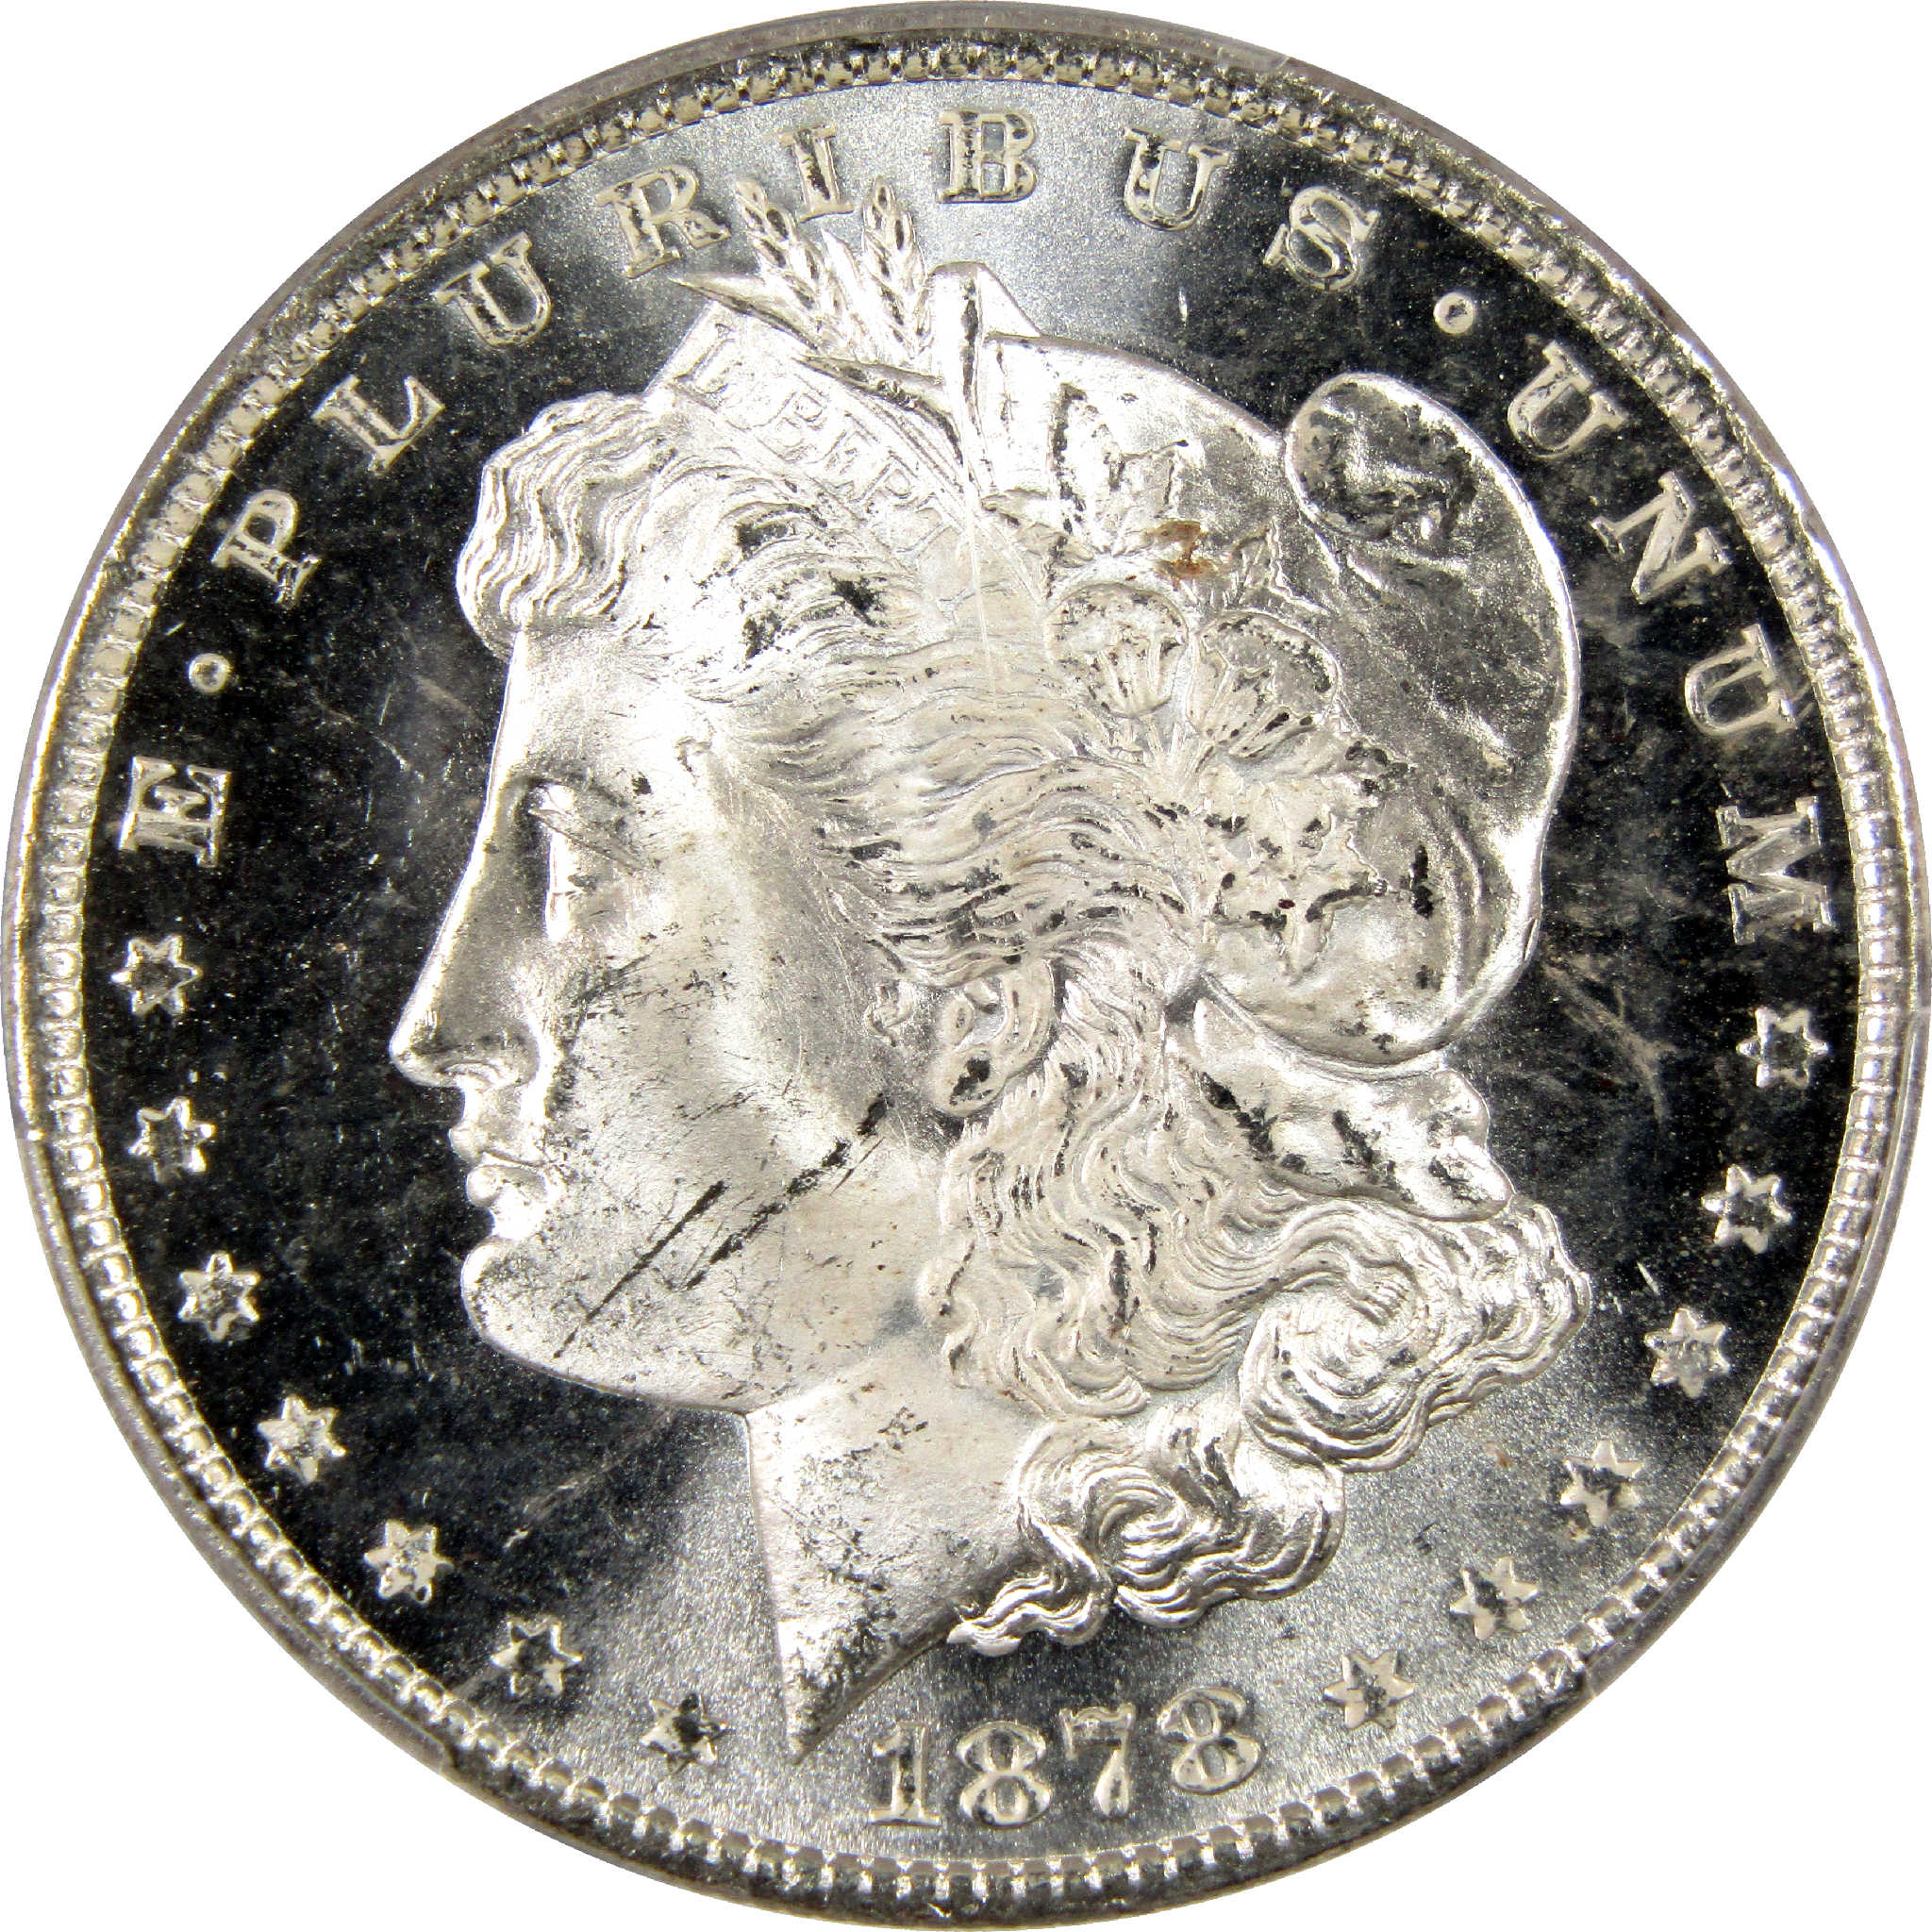 1878 7TF Rev 79 Morgan Dollar MS 63 PCGS Silver $1 Unc SKU:I11315 - Morgan coin - Morgan silver dollar - Morgan silver dollar for sale - Profile Coins &amp; Collectibles